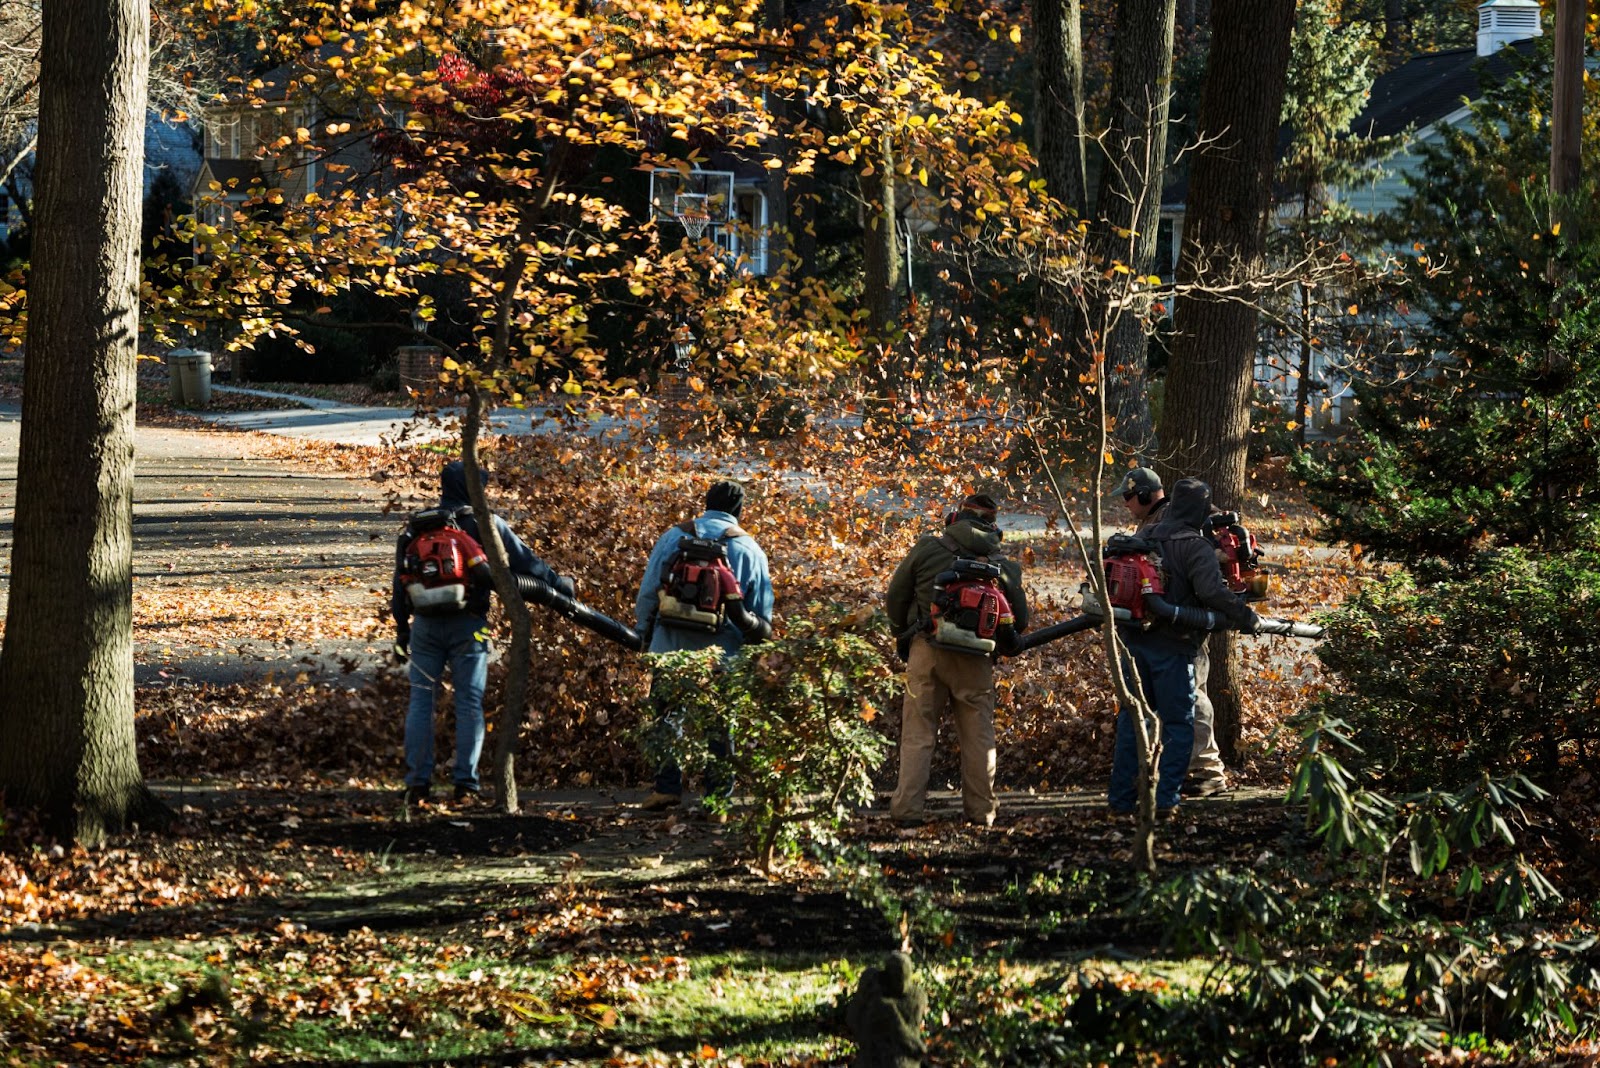 Leaf blowers are a scourge. Why is it hard to get rid of them?